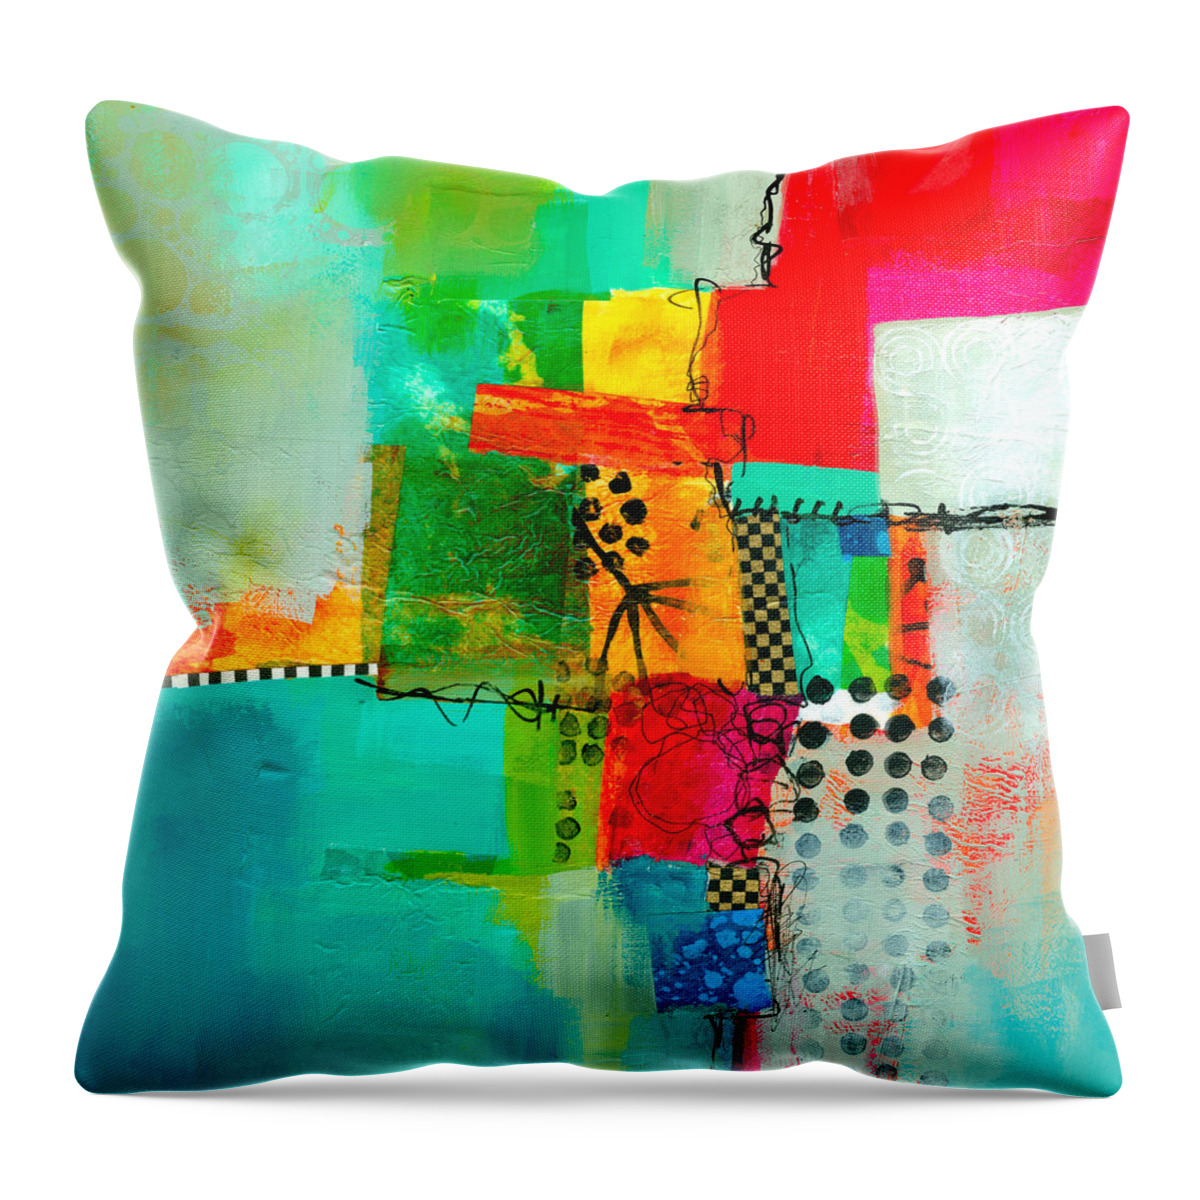 Fresh Paint Throw Pillow featuring the painting Fresh Paint #5 by Jane Davies